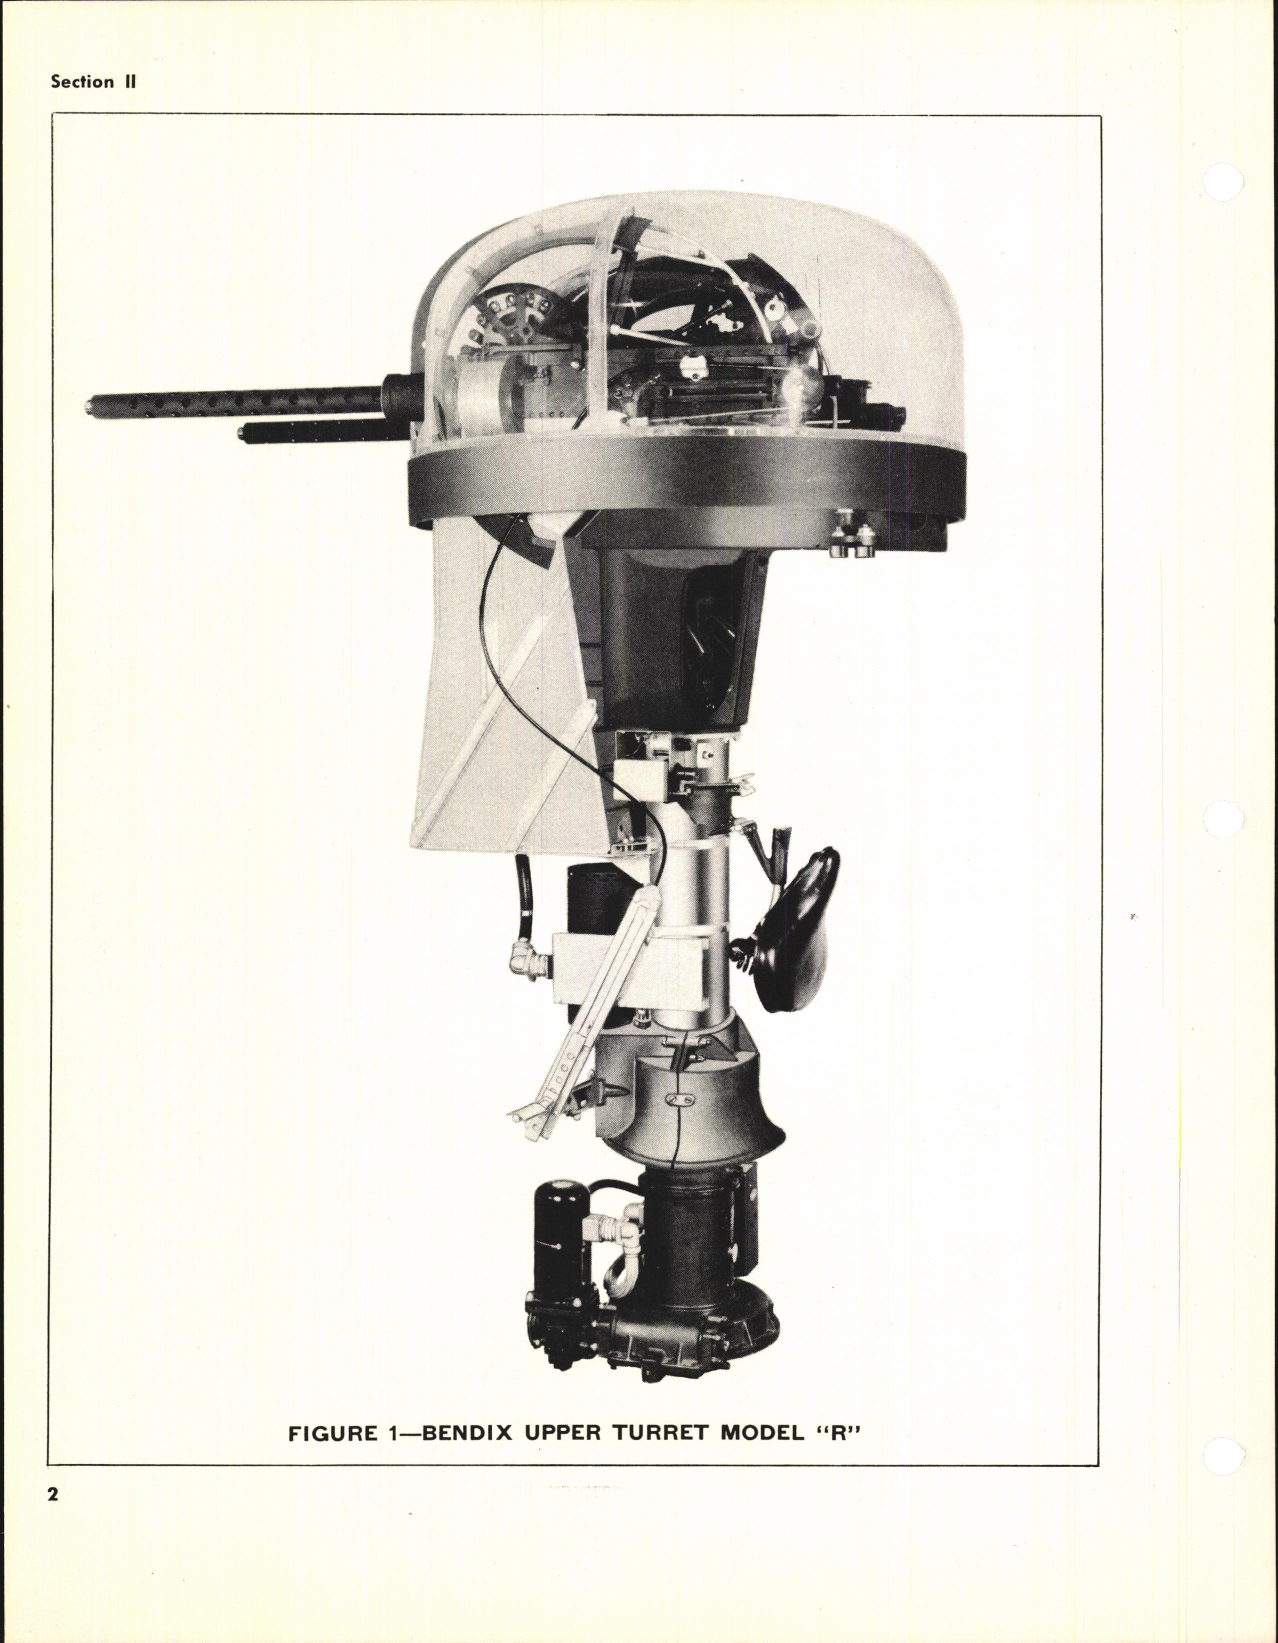 Sample page 6 from AirCorps Library document: Operation & Service Manual for the Electric Power Operated Bendix Upper Turret Model 